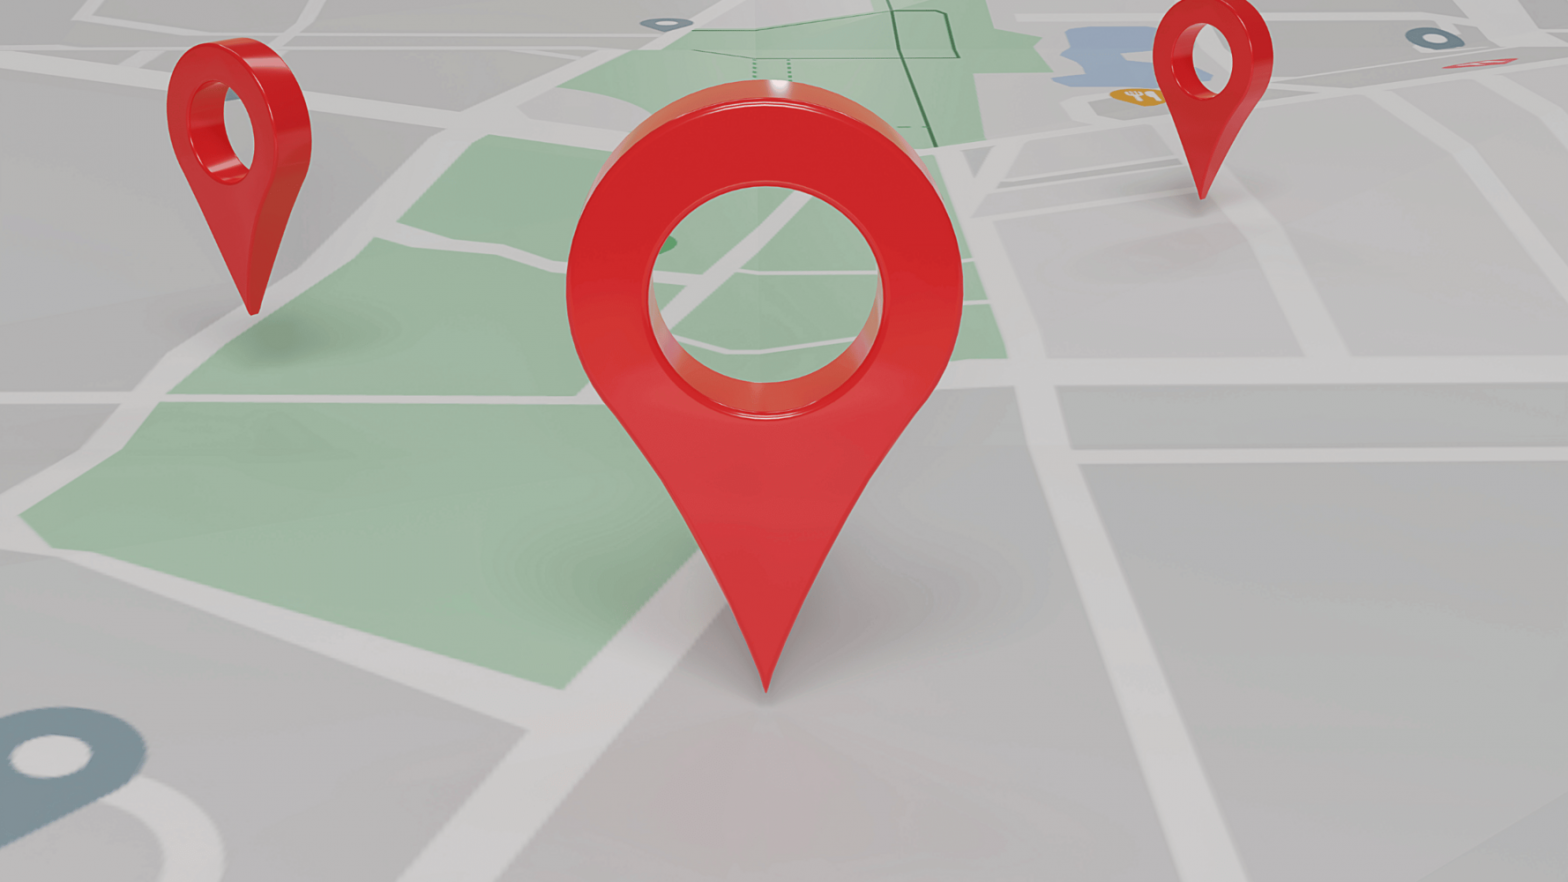 Close-up view of a pin marker placed on a map, representing the reasons why your home address and business should be kept separate to ensure privacy and security.